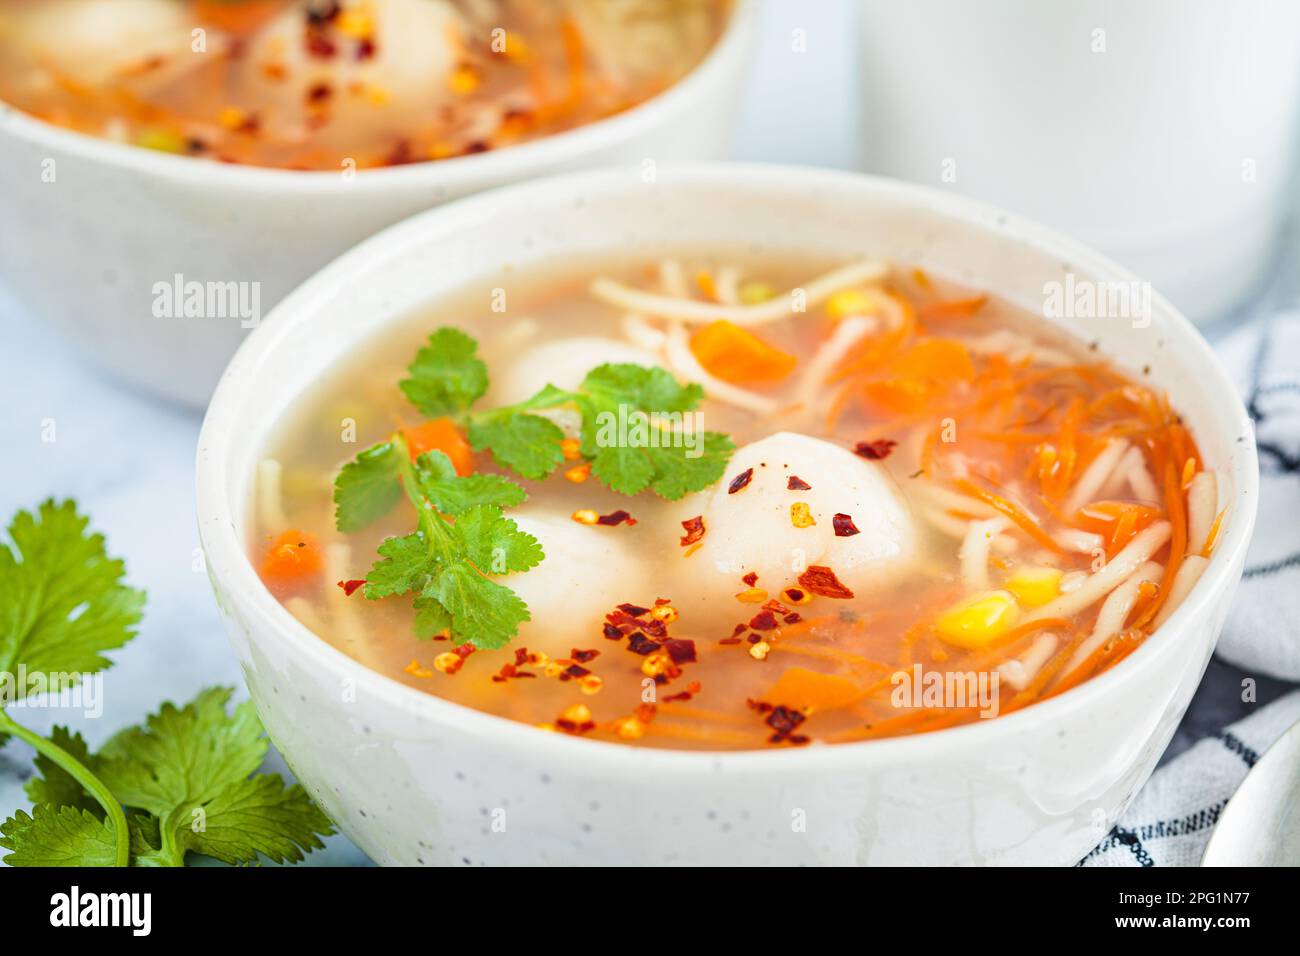 Potato balls soup with noodles and vegetables in a white bowl, white background, close-up. Vegan food concept. Stock Photo